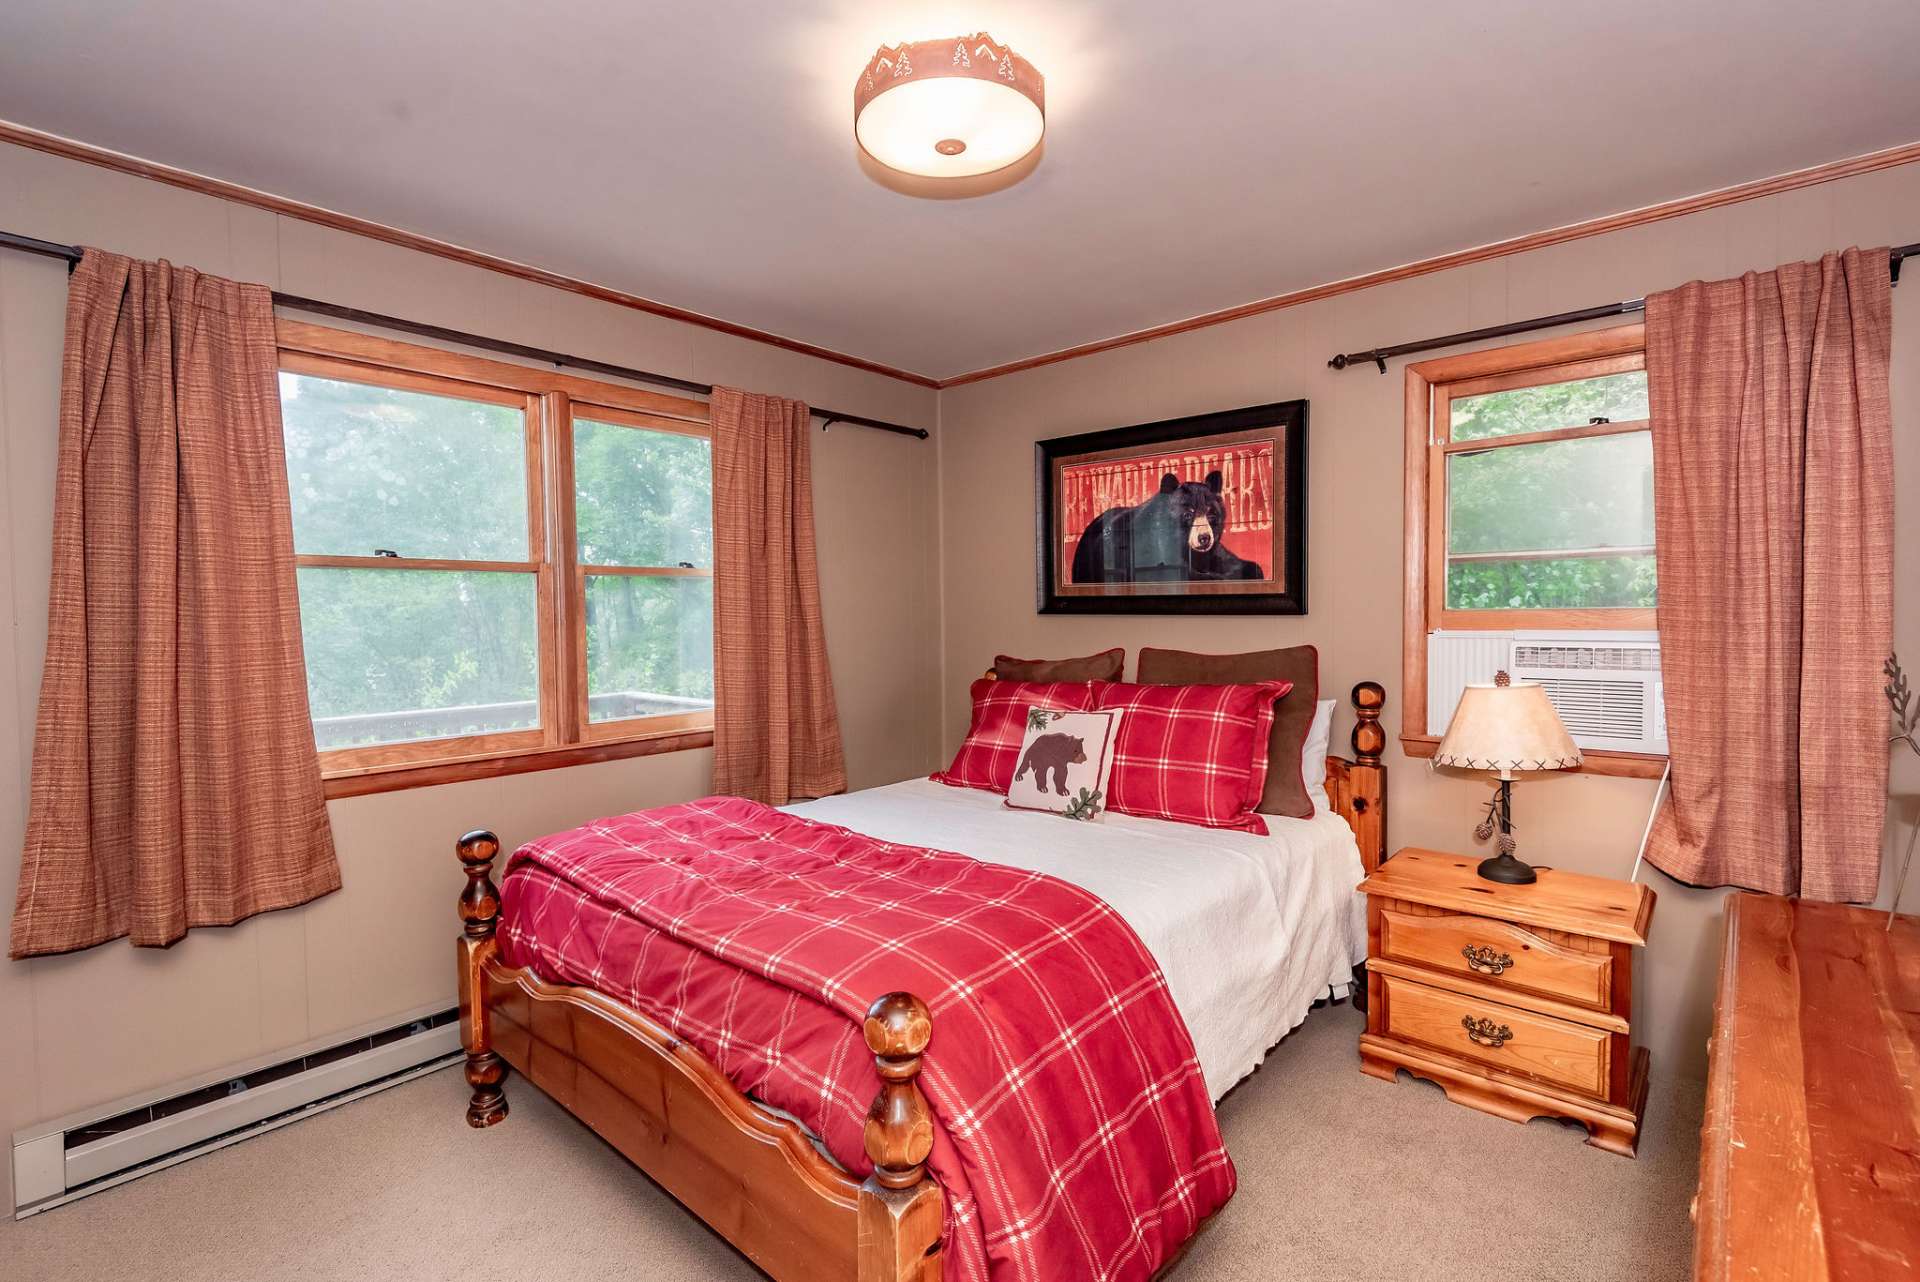 The main level offers two spacious bedrooms and a full bath.